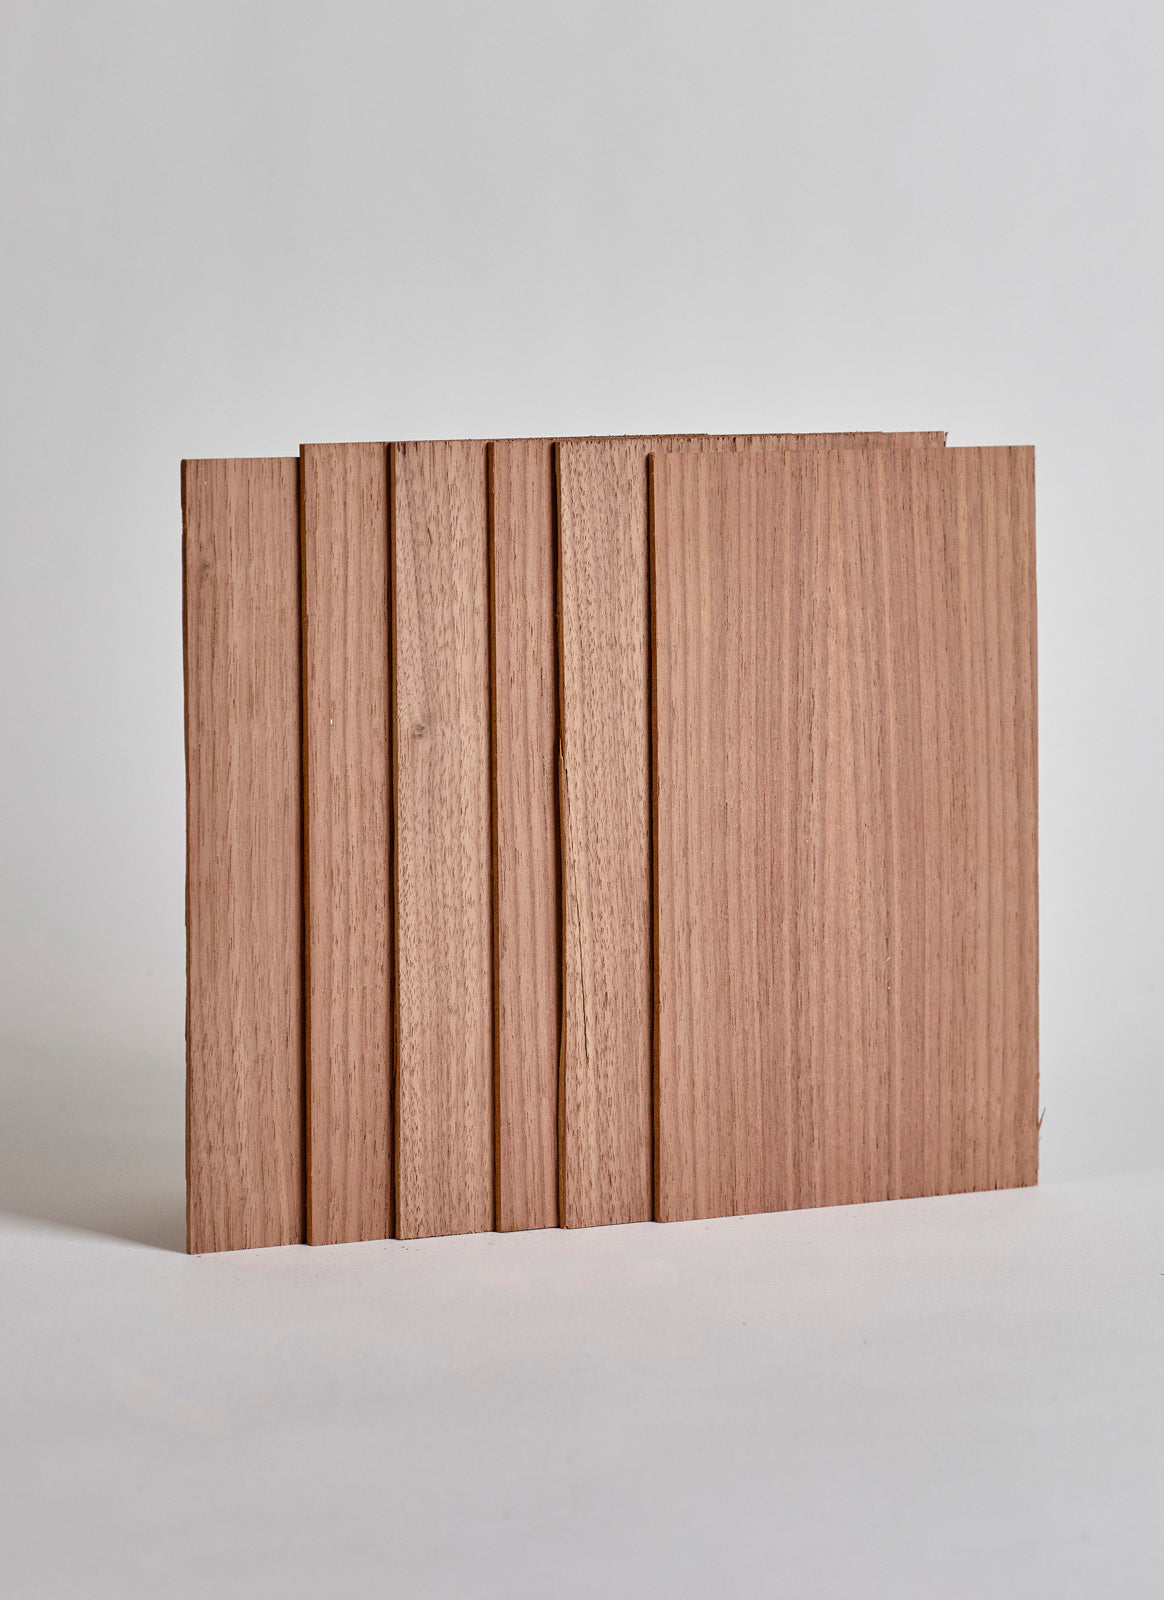 Plyco's 3mm American Walnut Legnoply Craft Pack, containing six sheets, on a white background